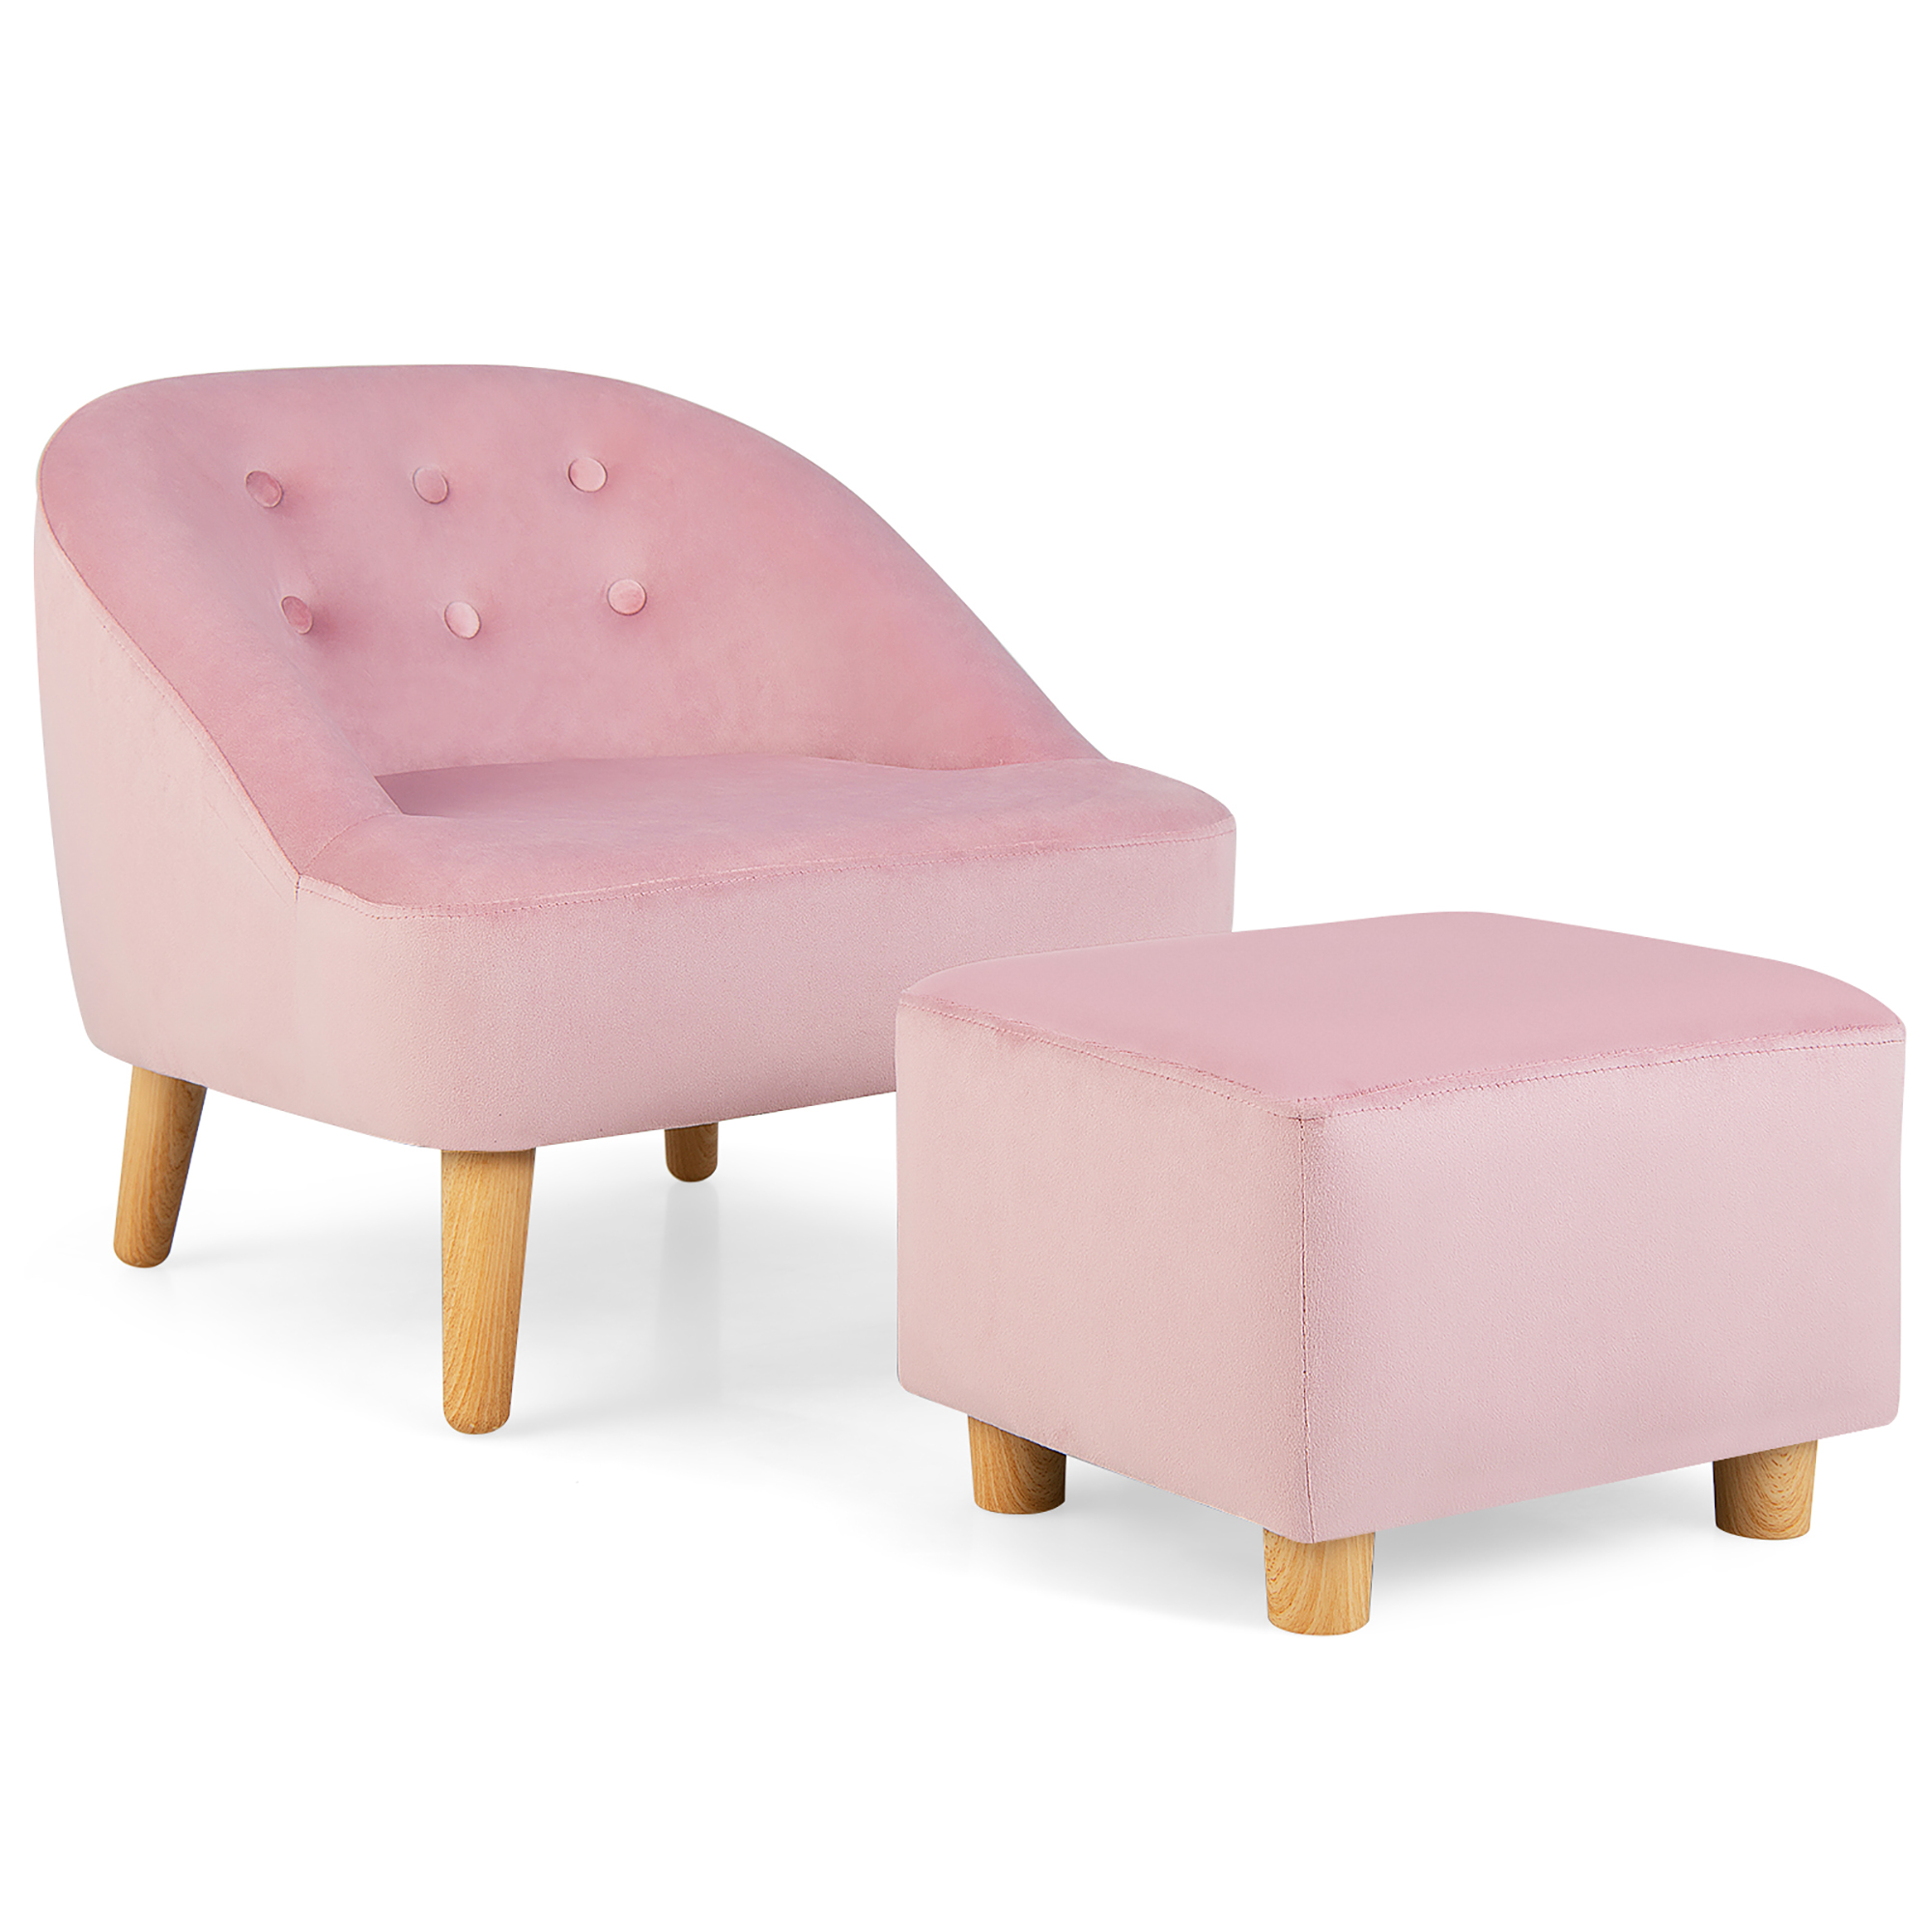 Costway Kids Sofa Chair w/ Ottoman Toddler Single Sofa Velvet Upholstered Couch Pink